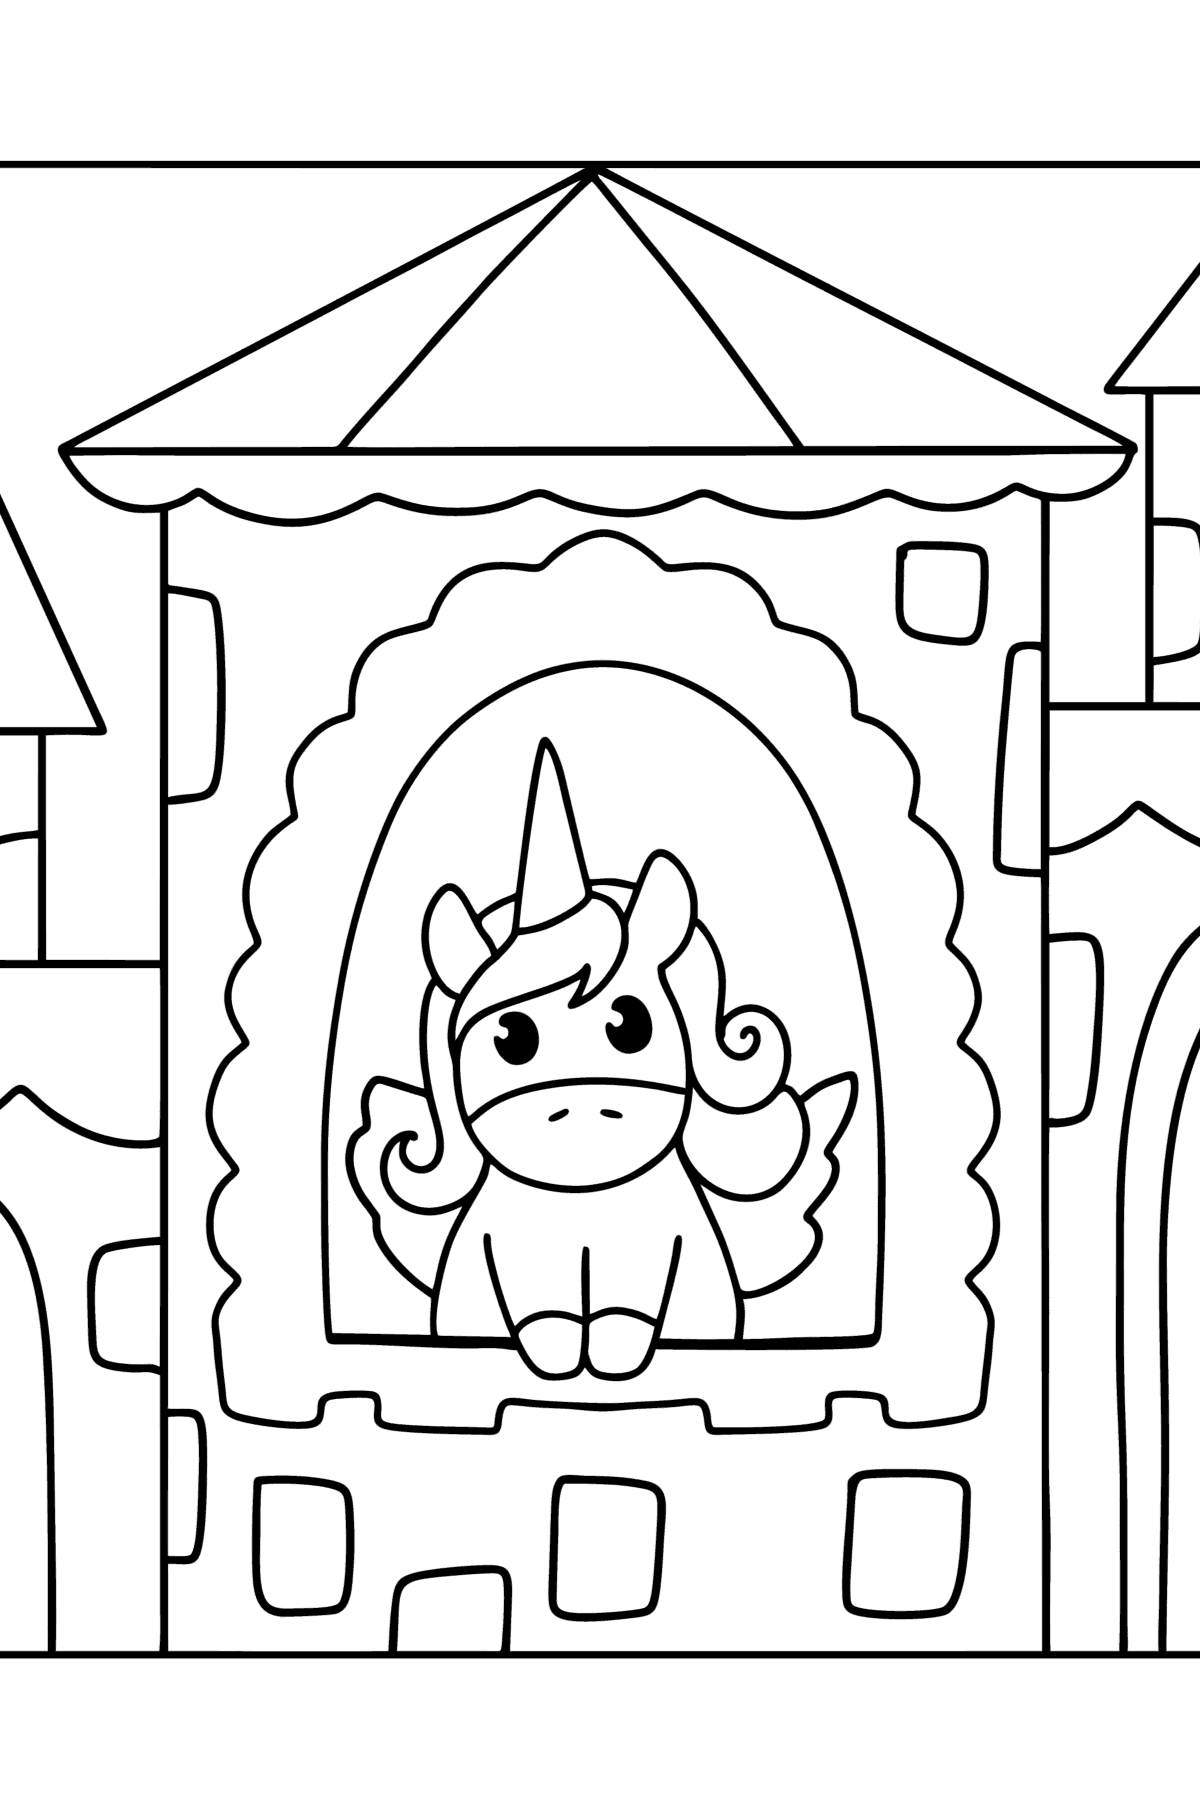 Unicorn in fairyland coloring page - Coloring Pages for Kids